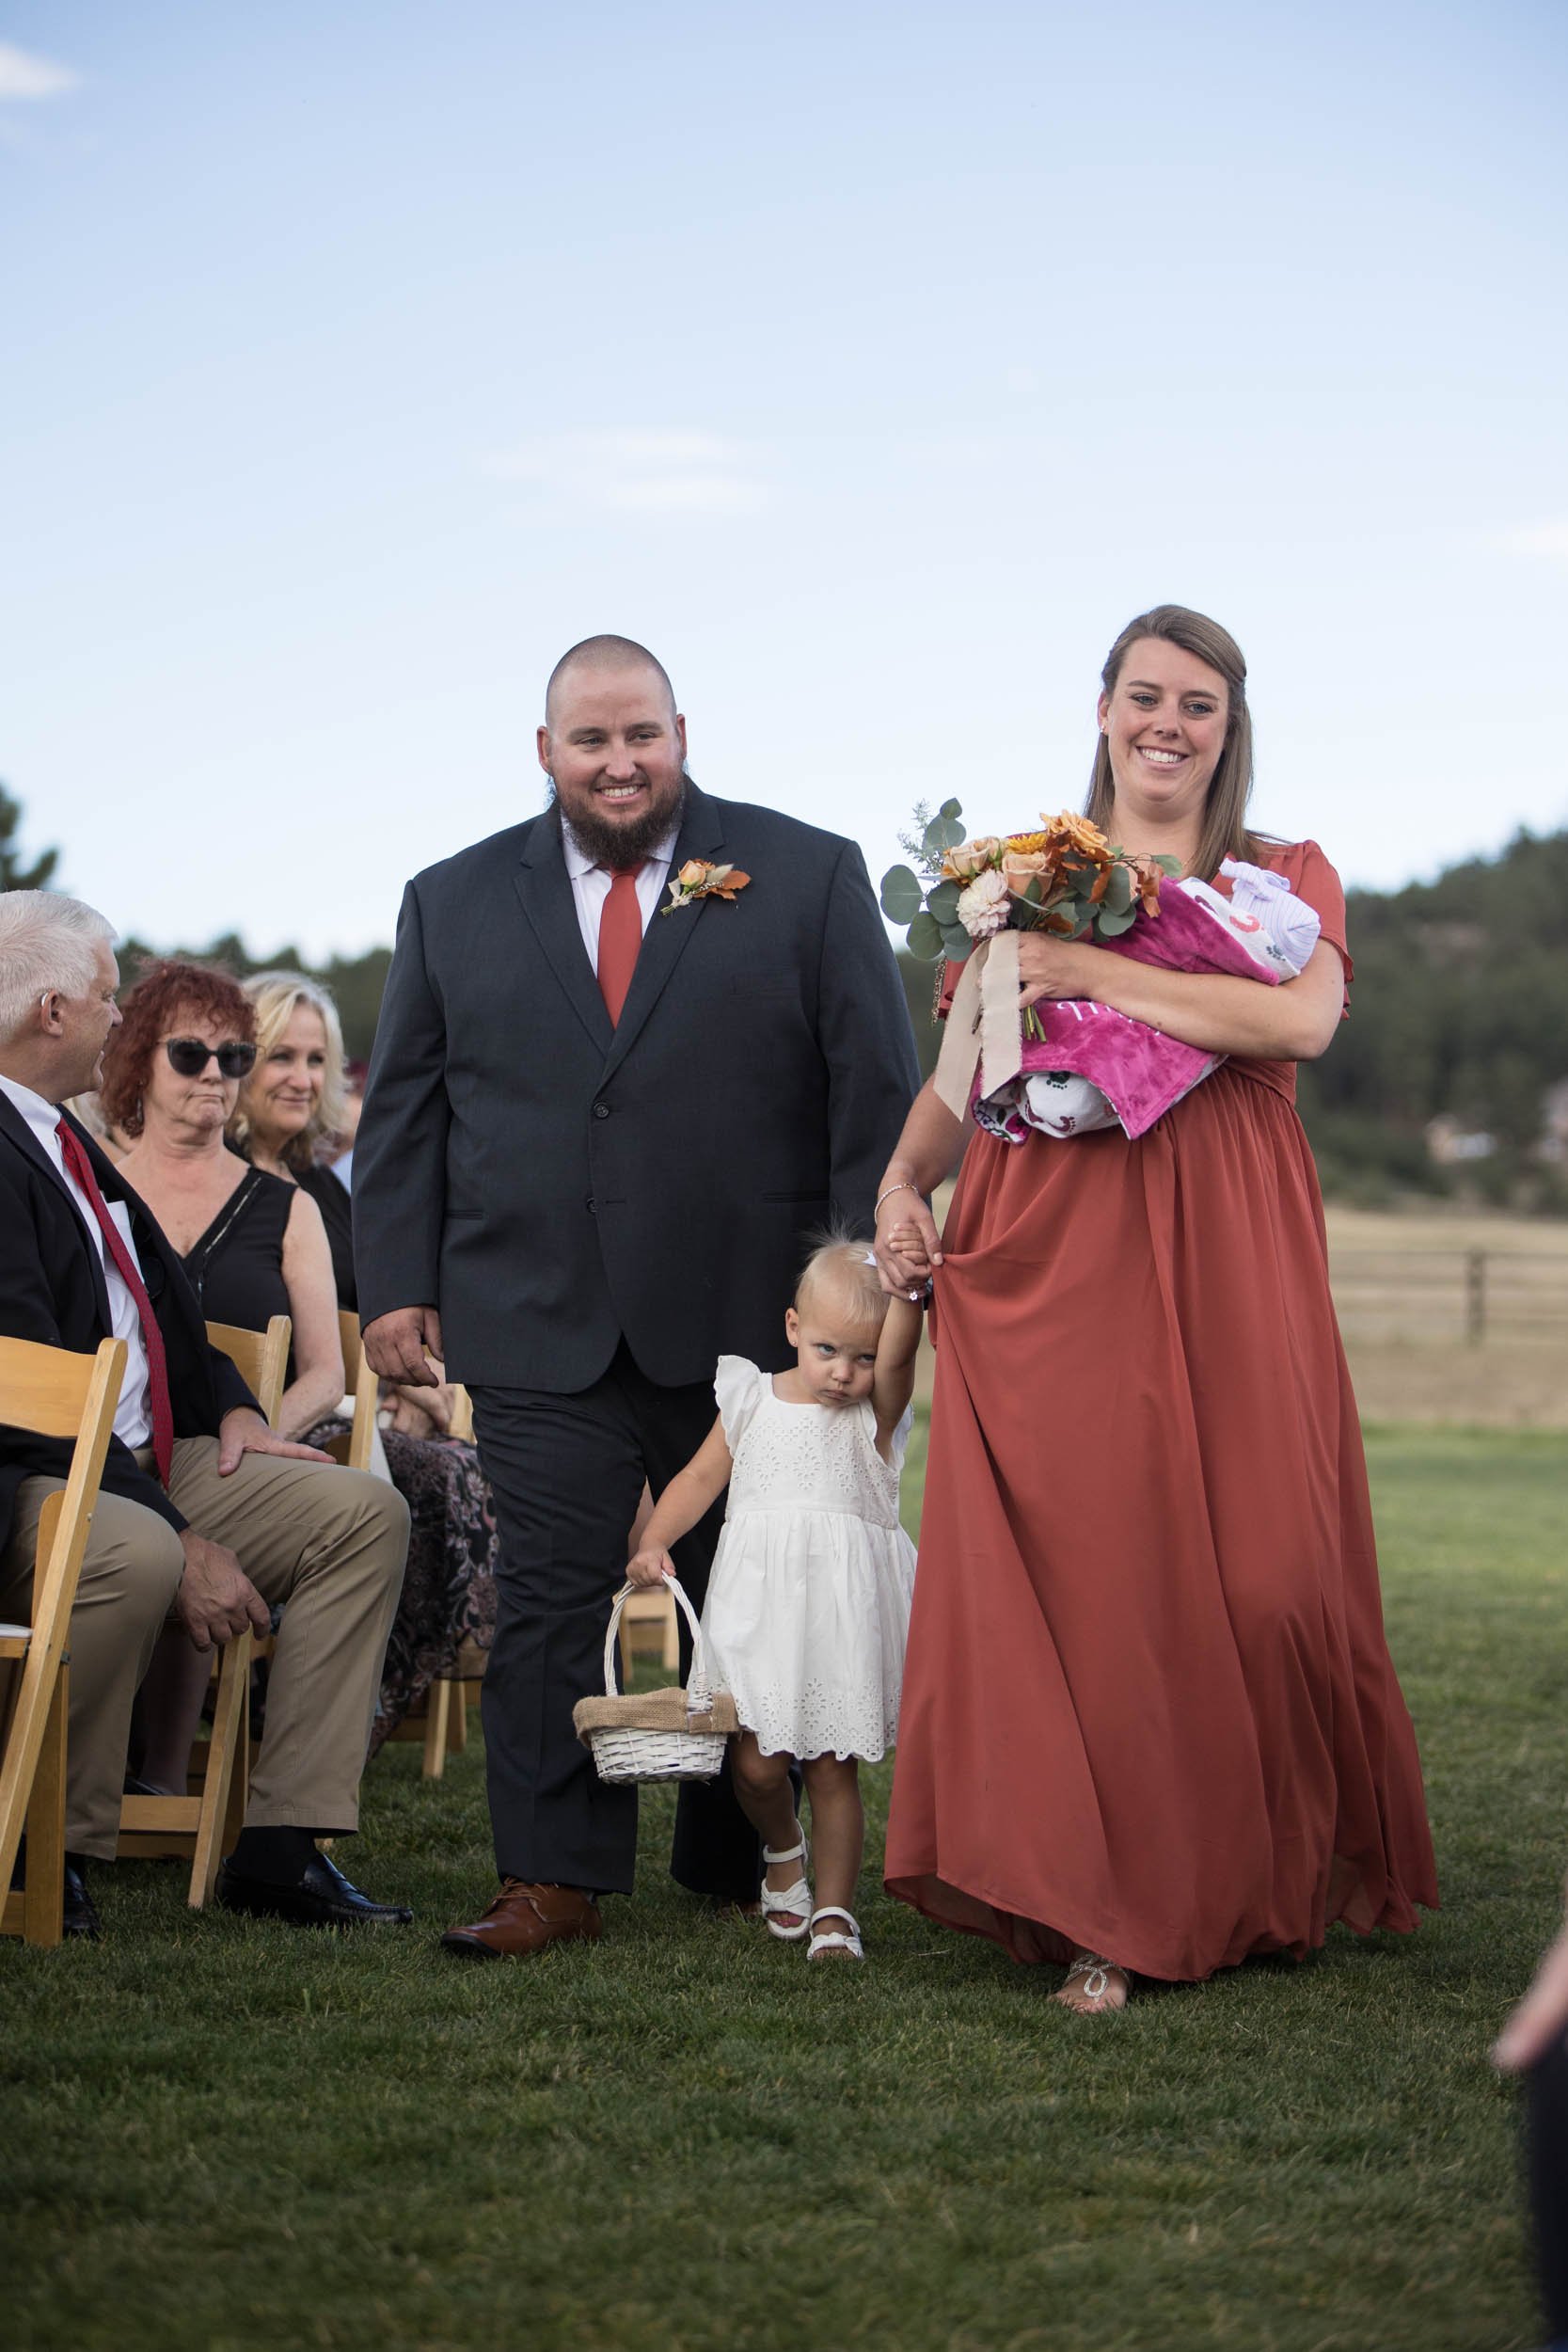 Ceremony at Spruce Mountain Ranch in Larkspur